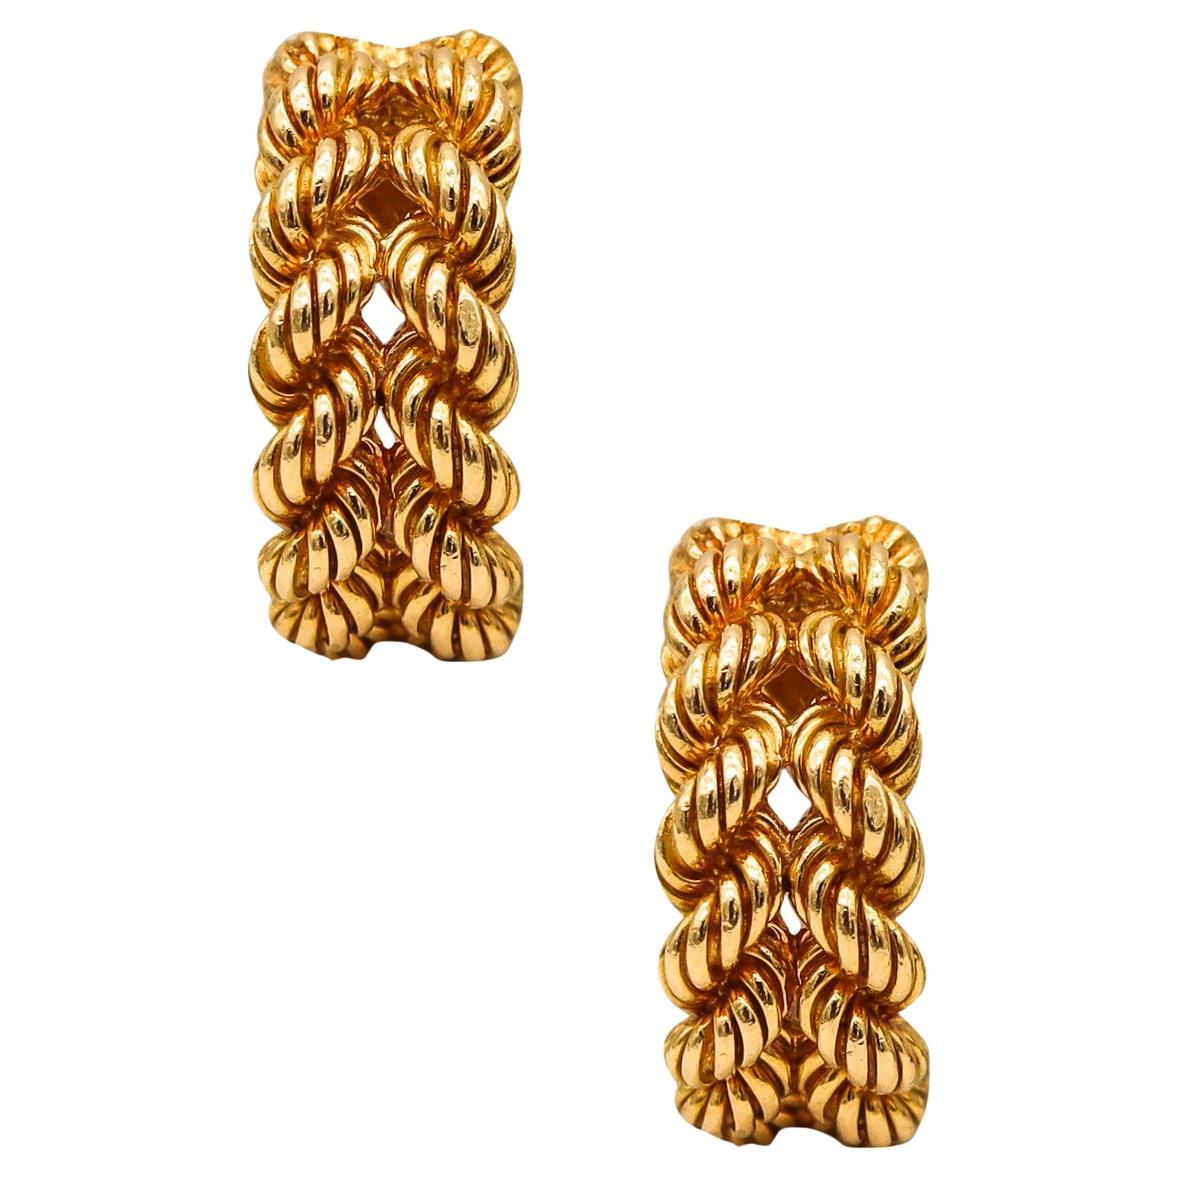 Hermes Paris 1970 Twisted Wires Clips on Earrings in Solid 18kt Yellow Gold For Sale